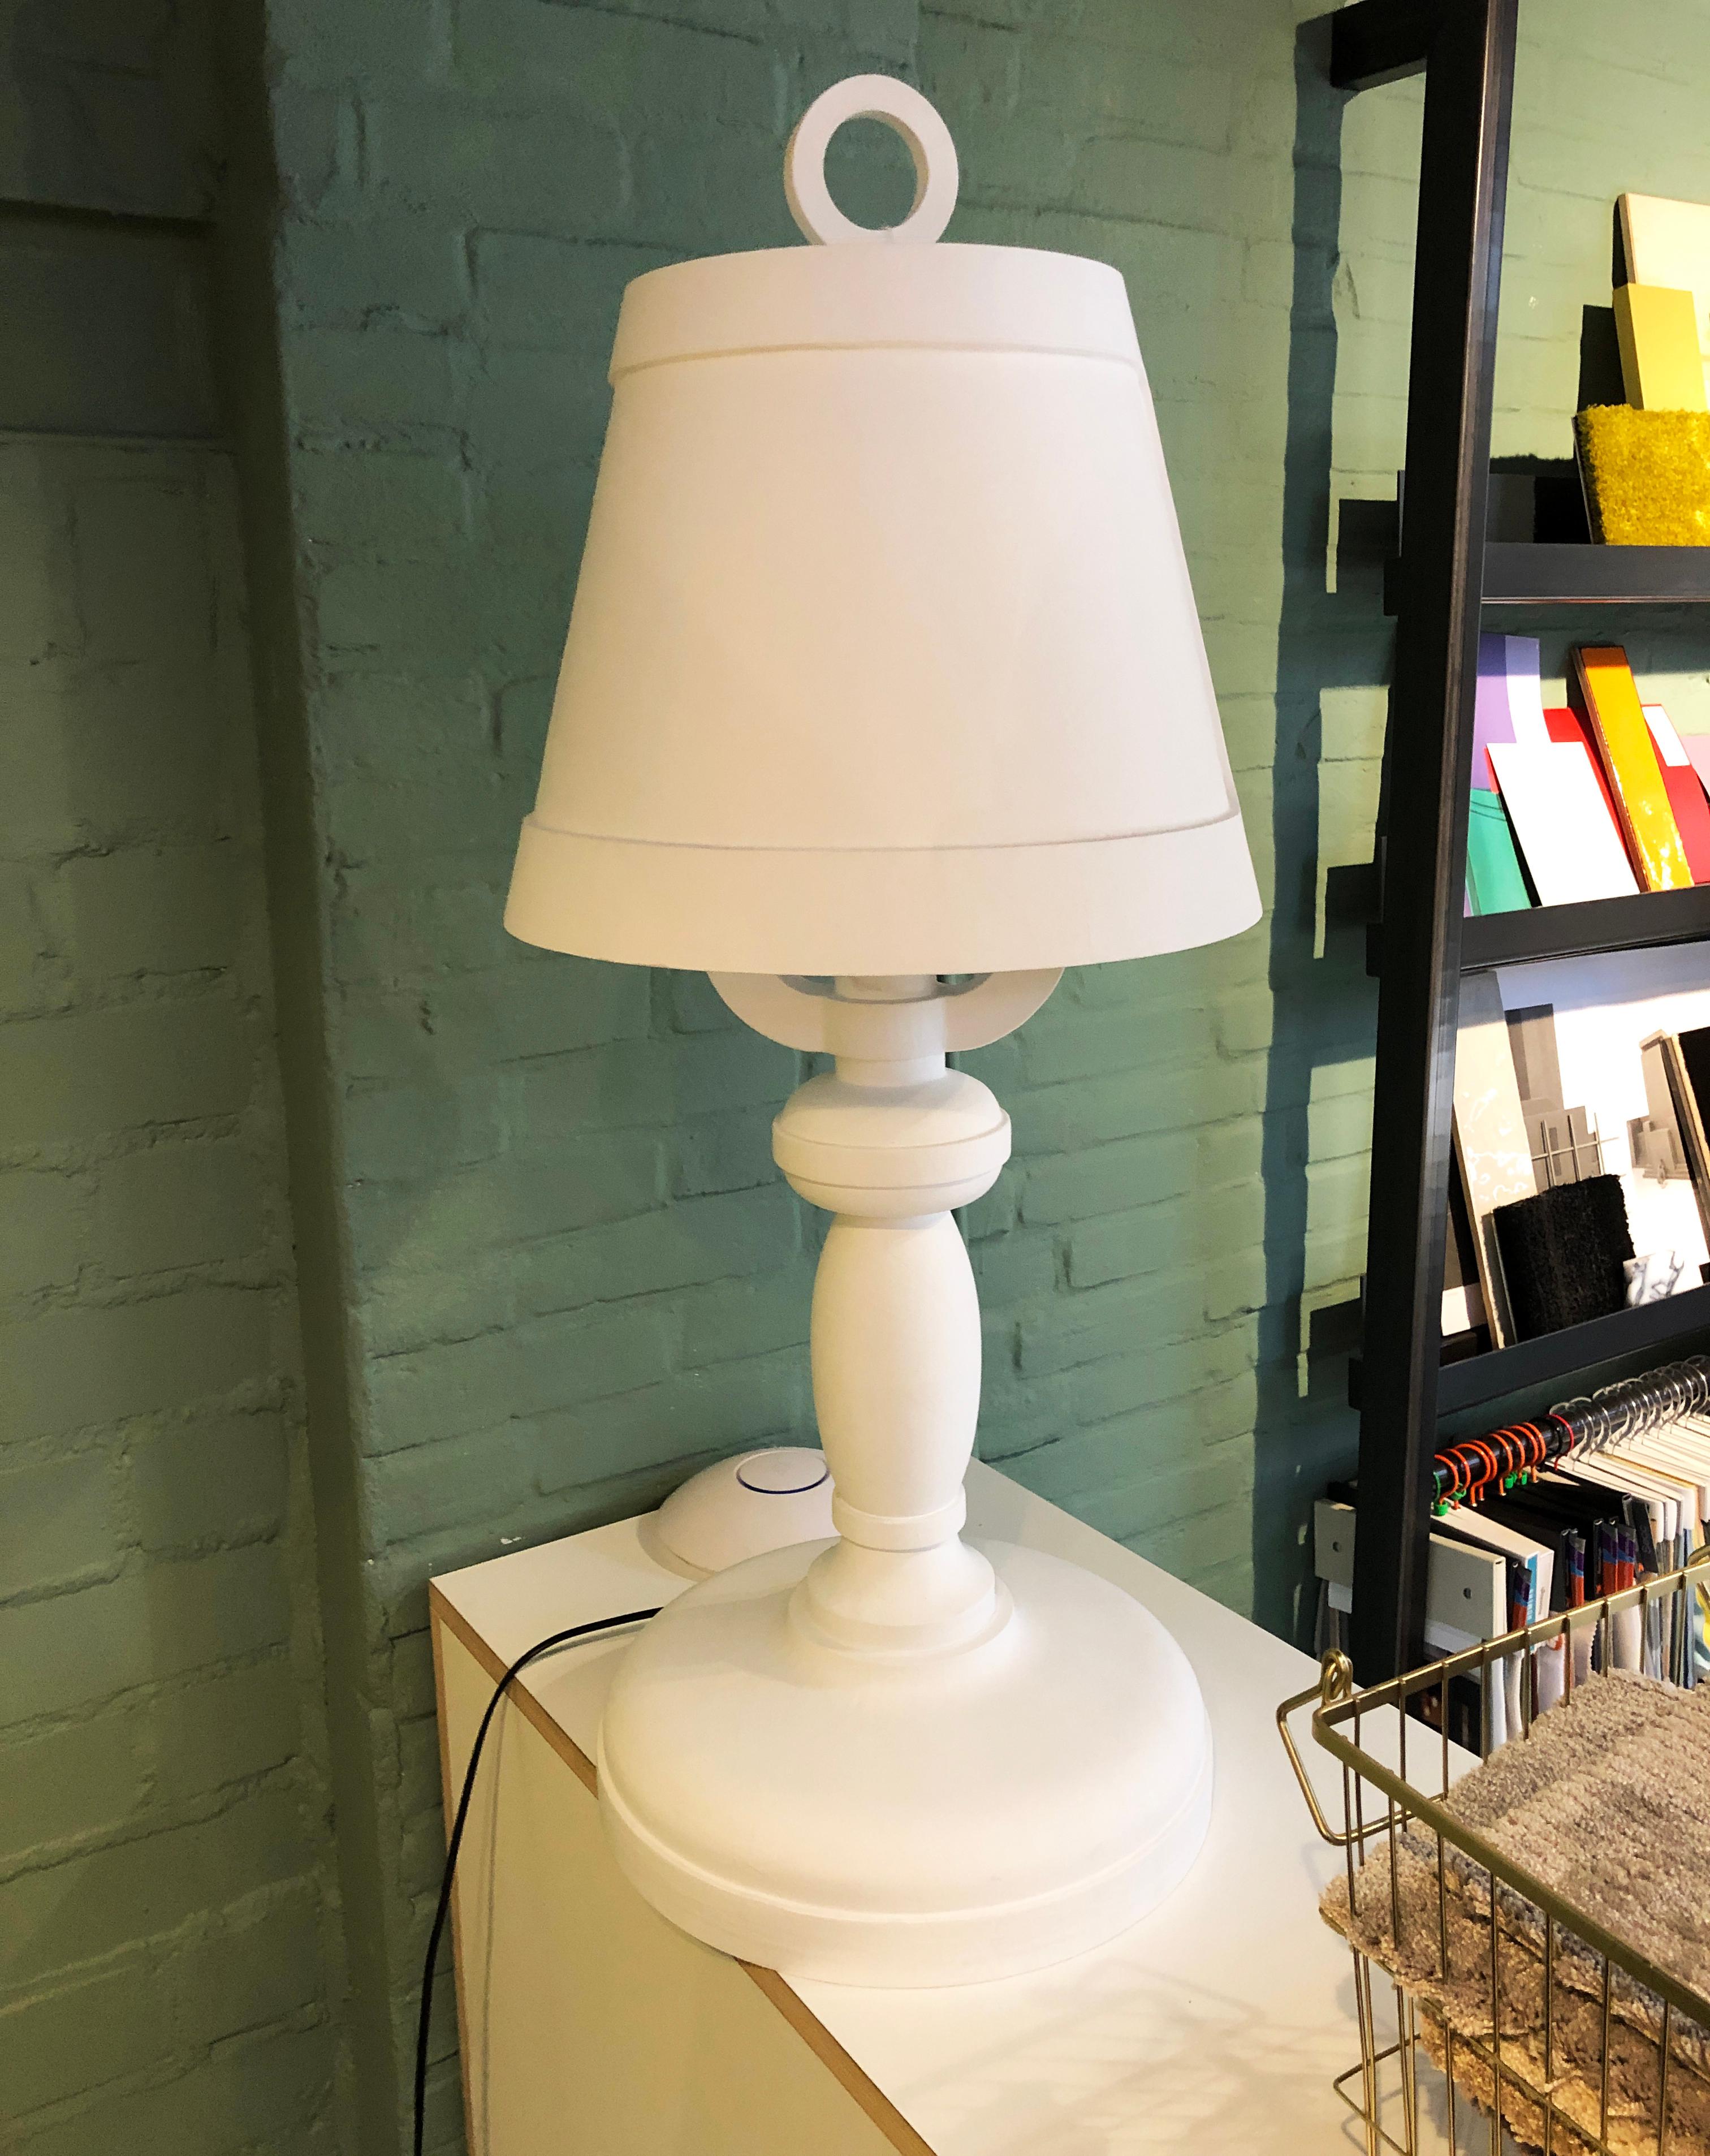 Designed by Studio Job, the Paper Table Lamp is made of paper, cardboard and paper maché. The Lamp is massive but still very light. 
The Moooi Paper Table lamp is no longer in production. 
This concerns the last pieces produced.

Did the idea of